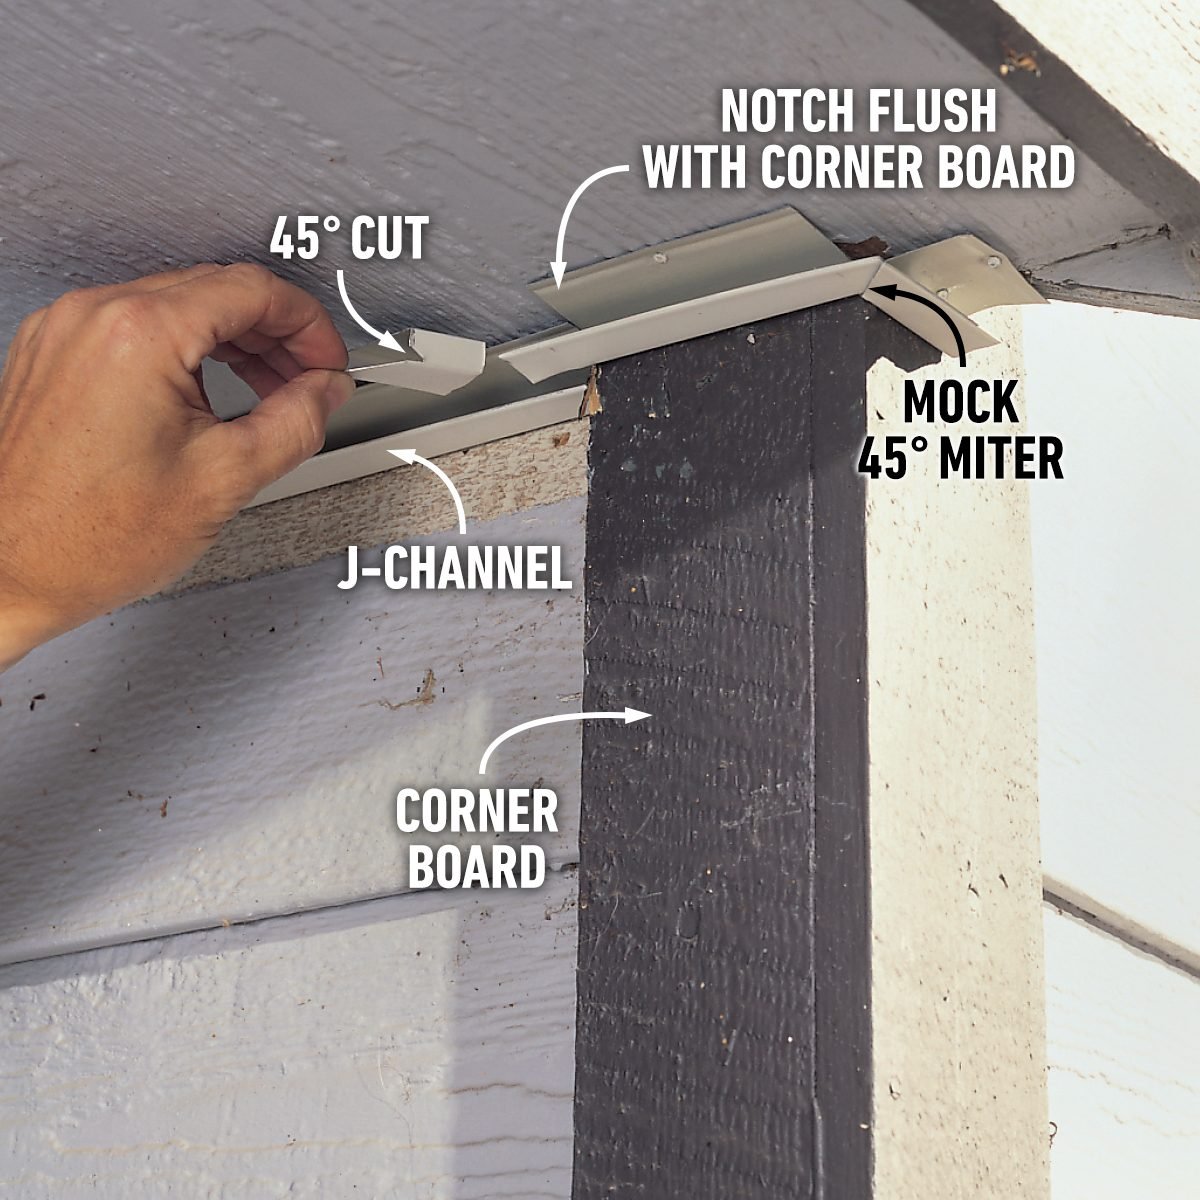 https://www.familyhandyman.com/wp-content/uploads/2021/02/FH00MAY_ALUMSF_06-How-to-Install-Aluminum-Soffits-That-are-Maintenance-Free.jpg?fit=640%2C640